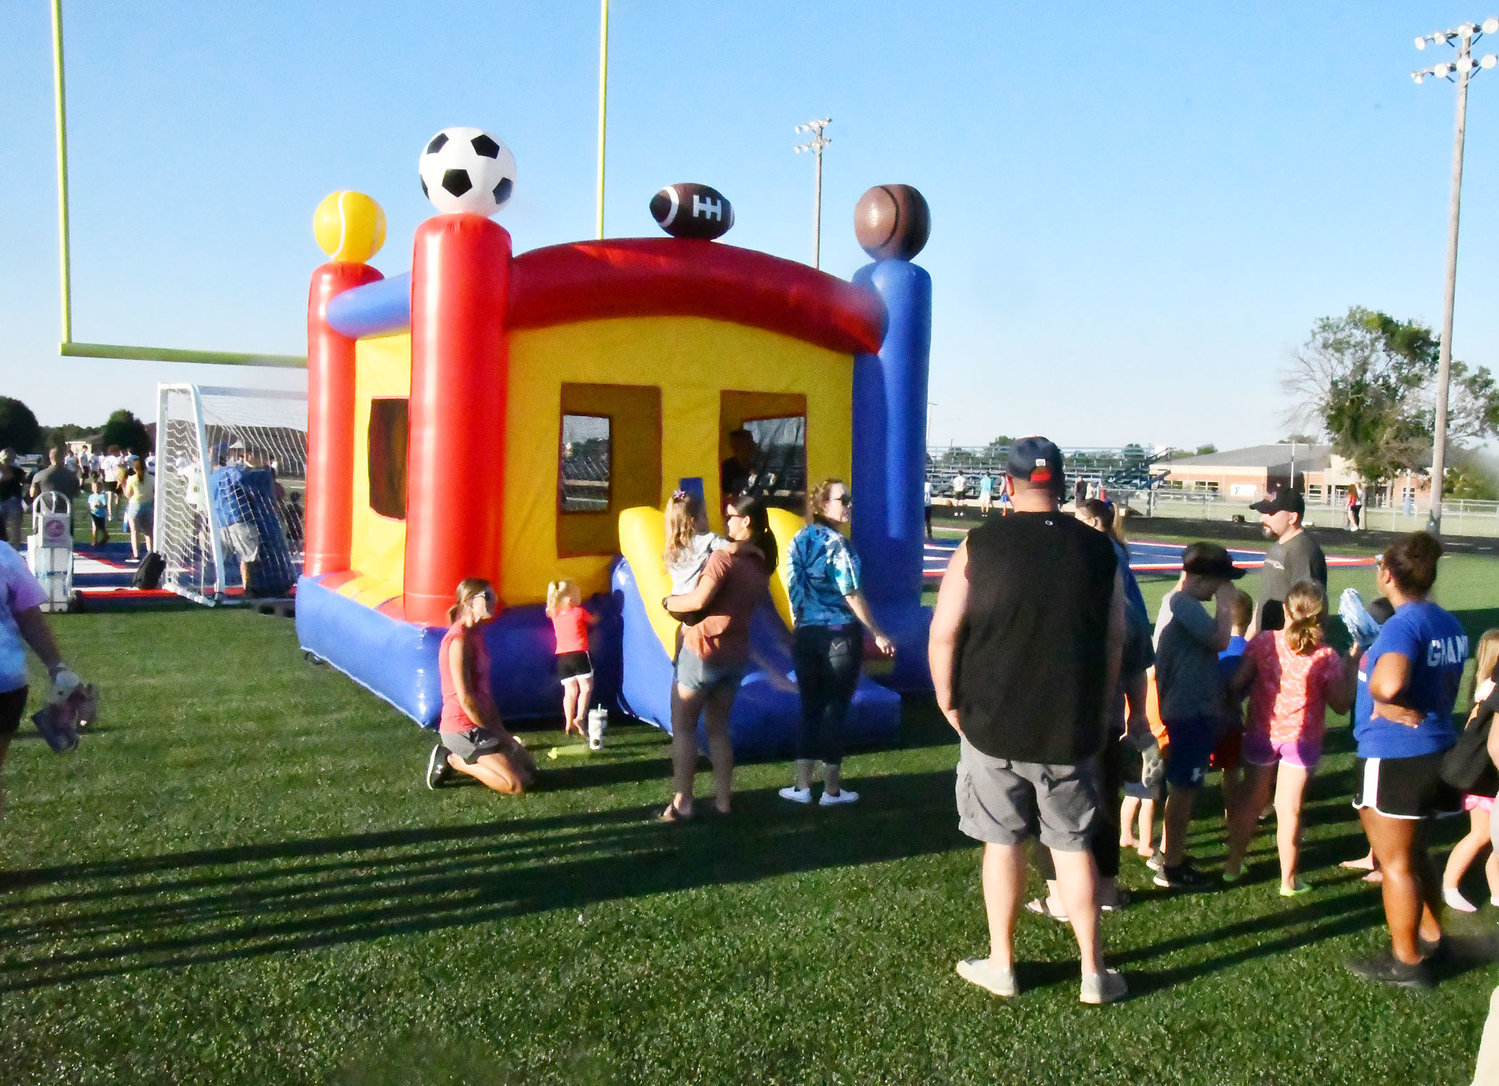 Lines were long for the bounce house, which was a headline attraction at "Meet The Spartans." Family Life Fellowship provided the bounce house.